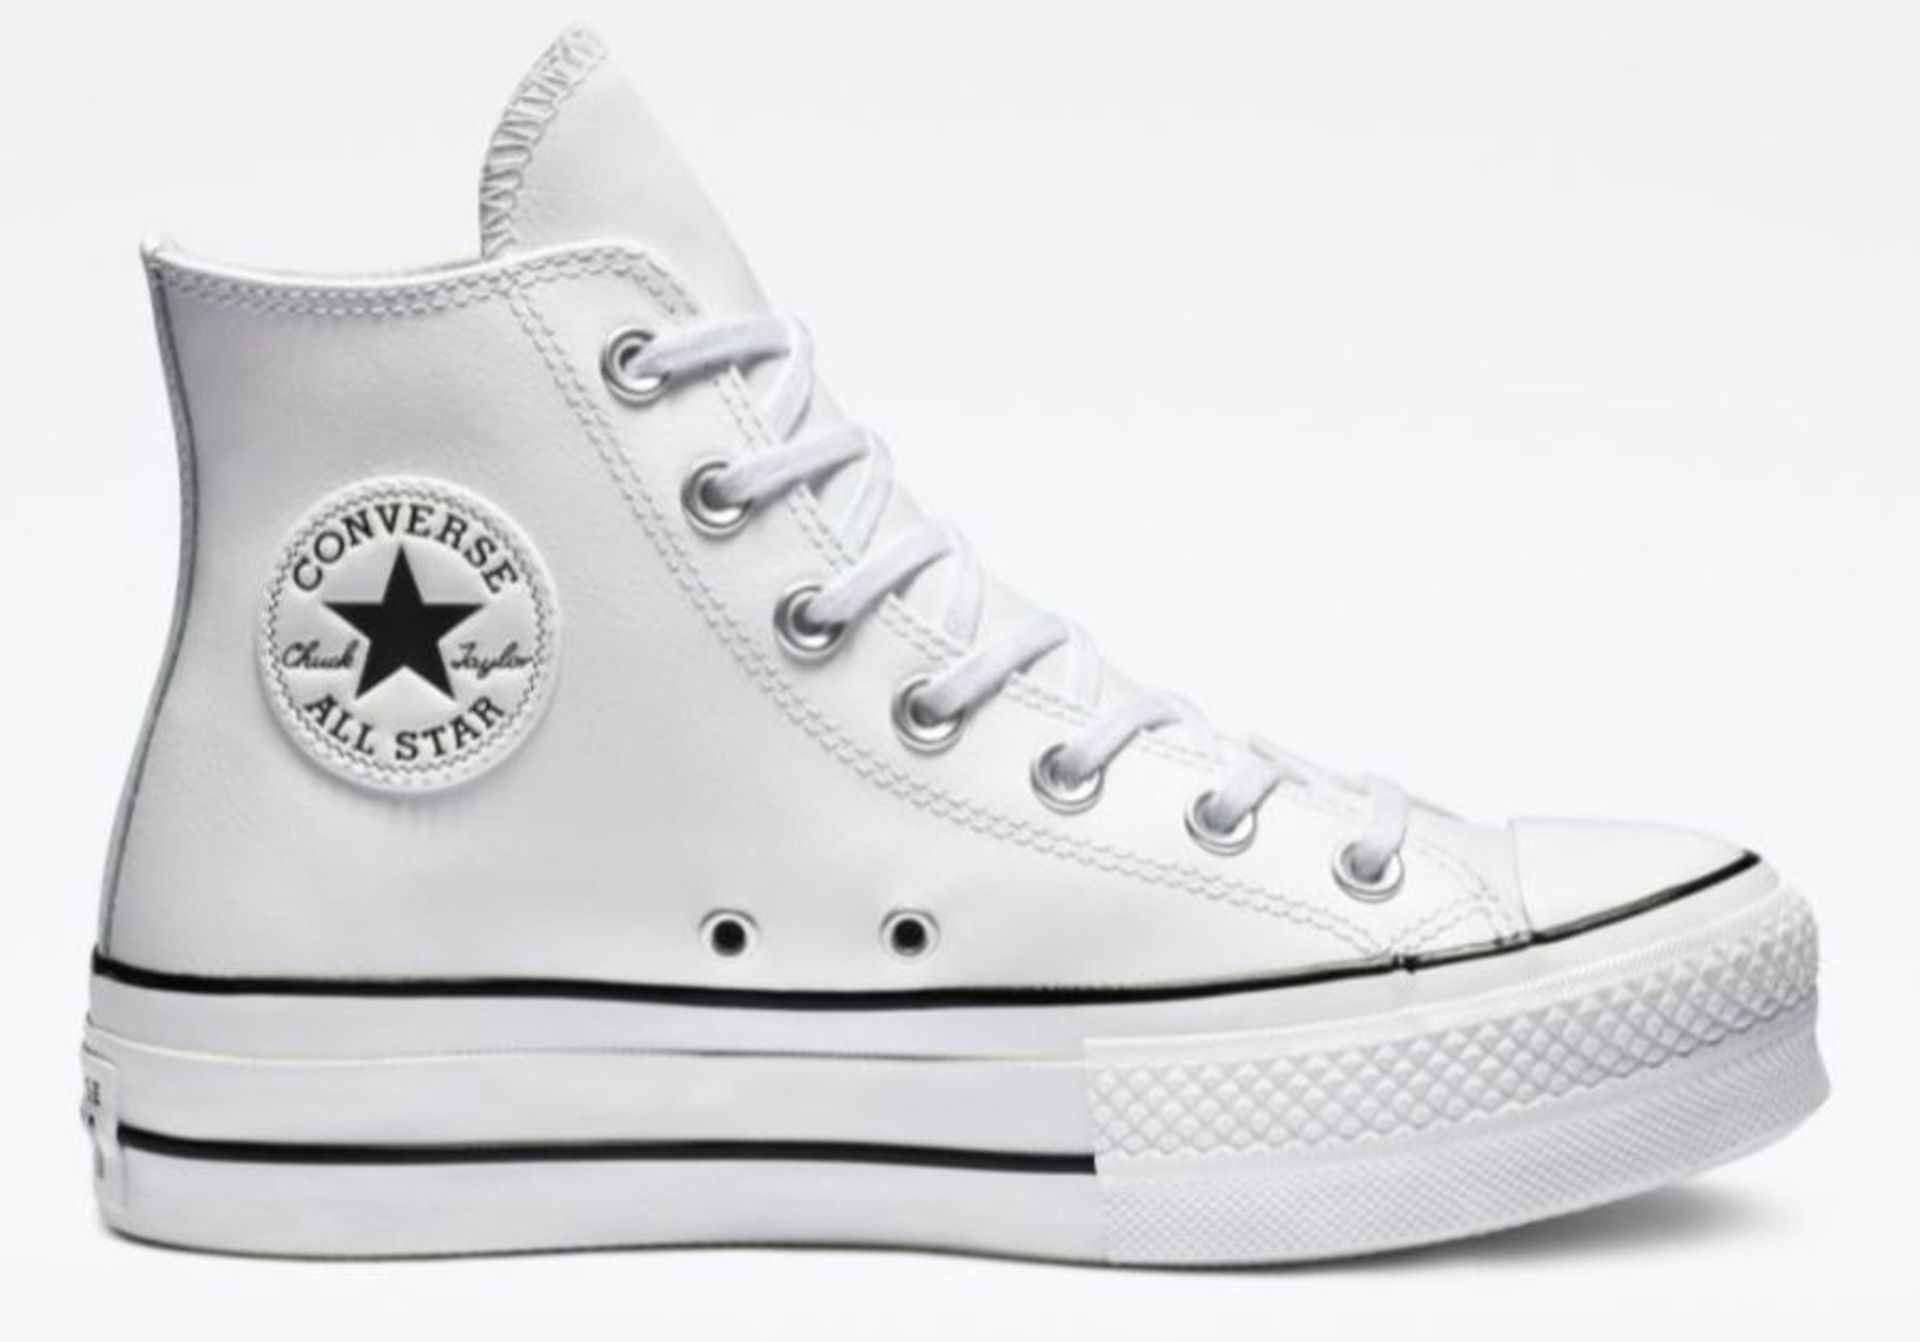 1 X CONVERSE CLEAN LEATHER PLATFORM CHUCK TAYLOR ALL STAR / SIZE UK 5.5 / RRP £80.00 /BRAND NEW /